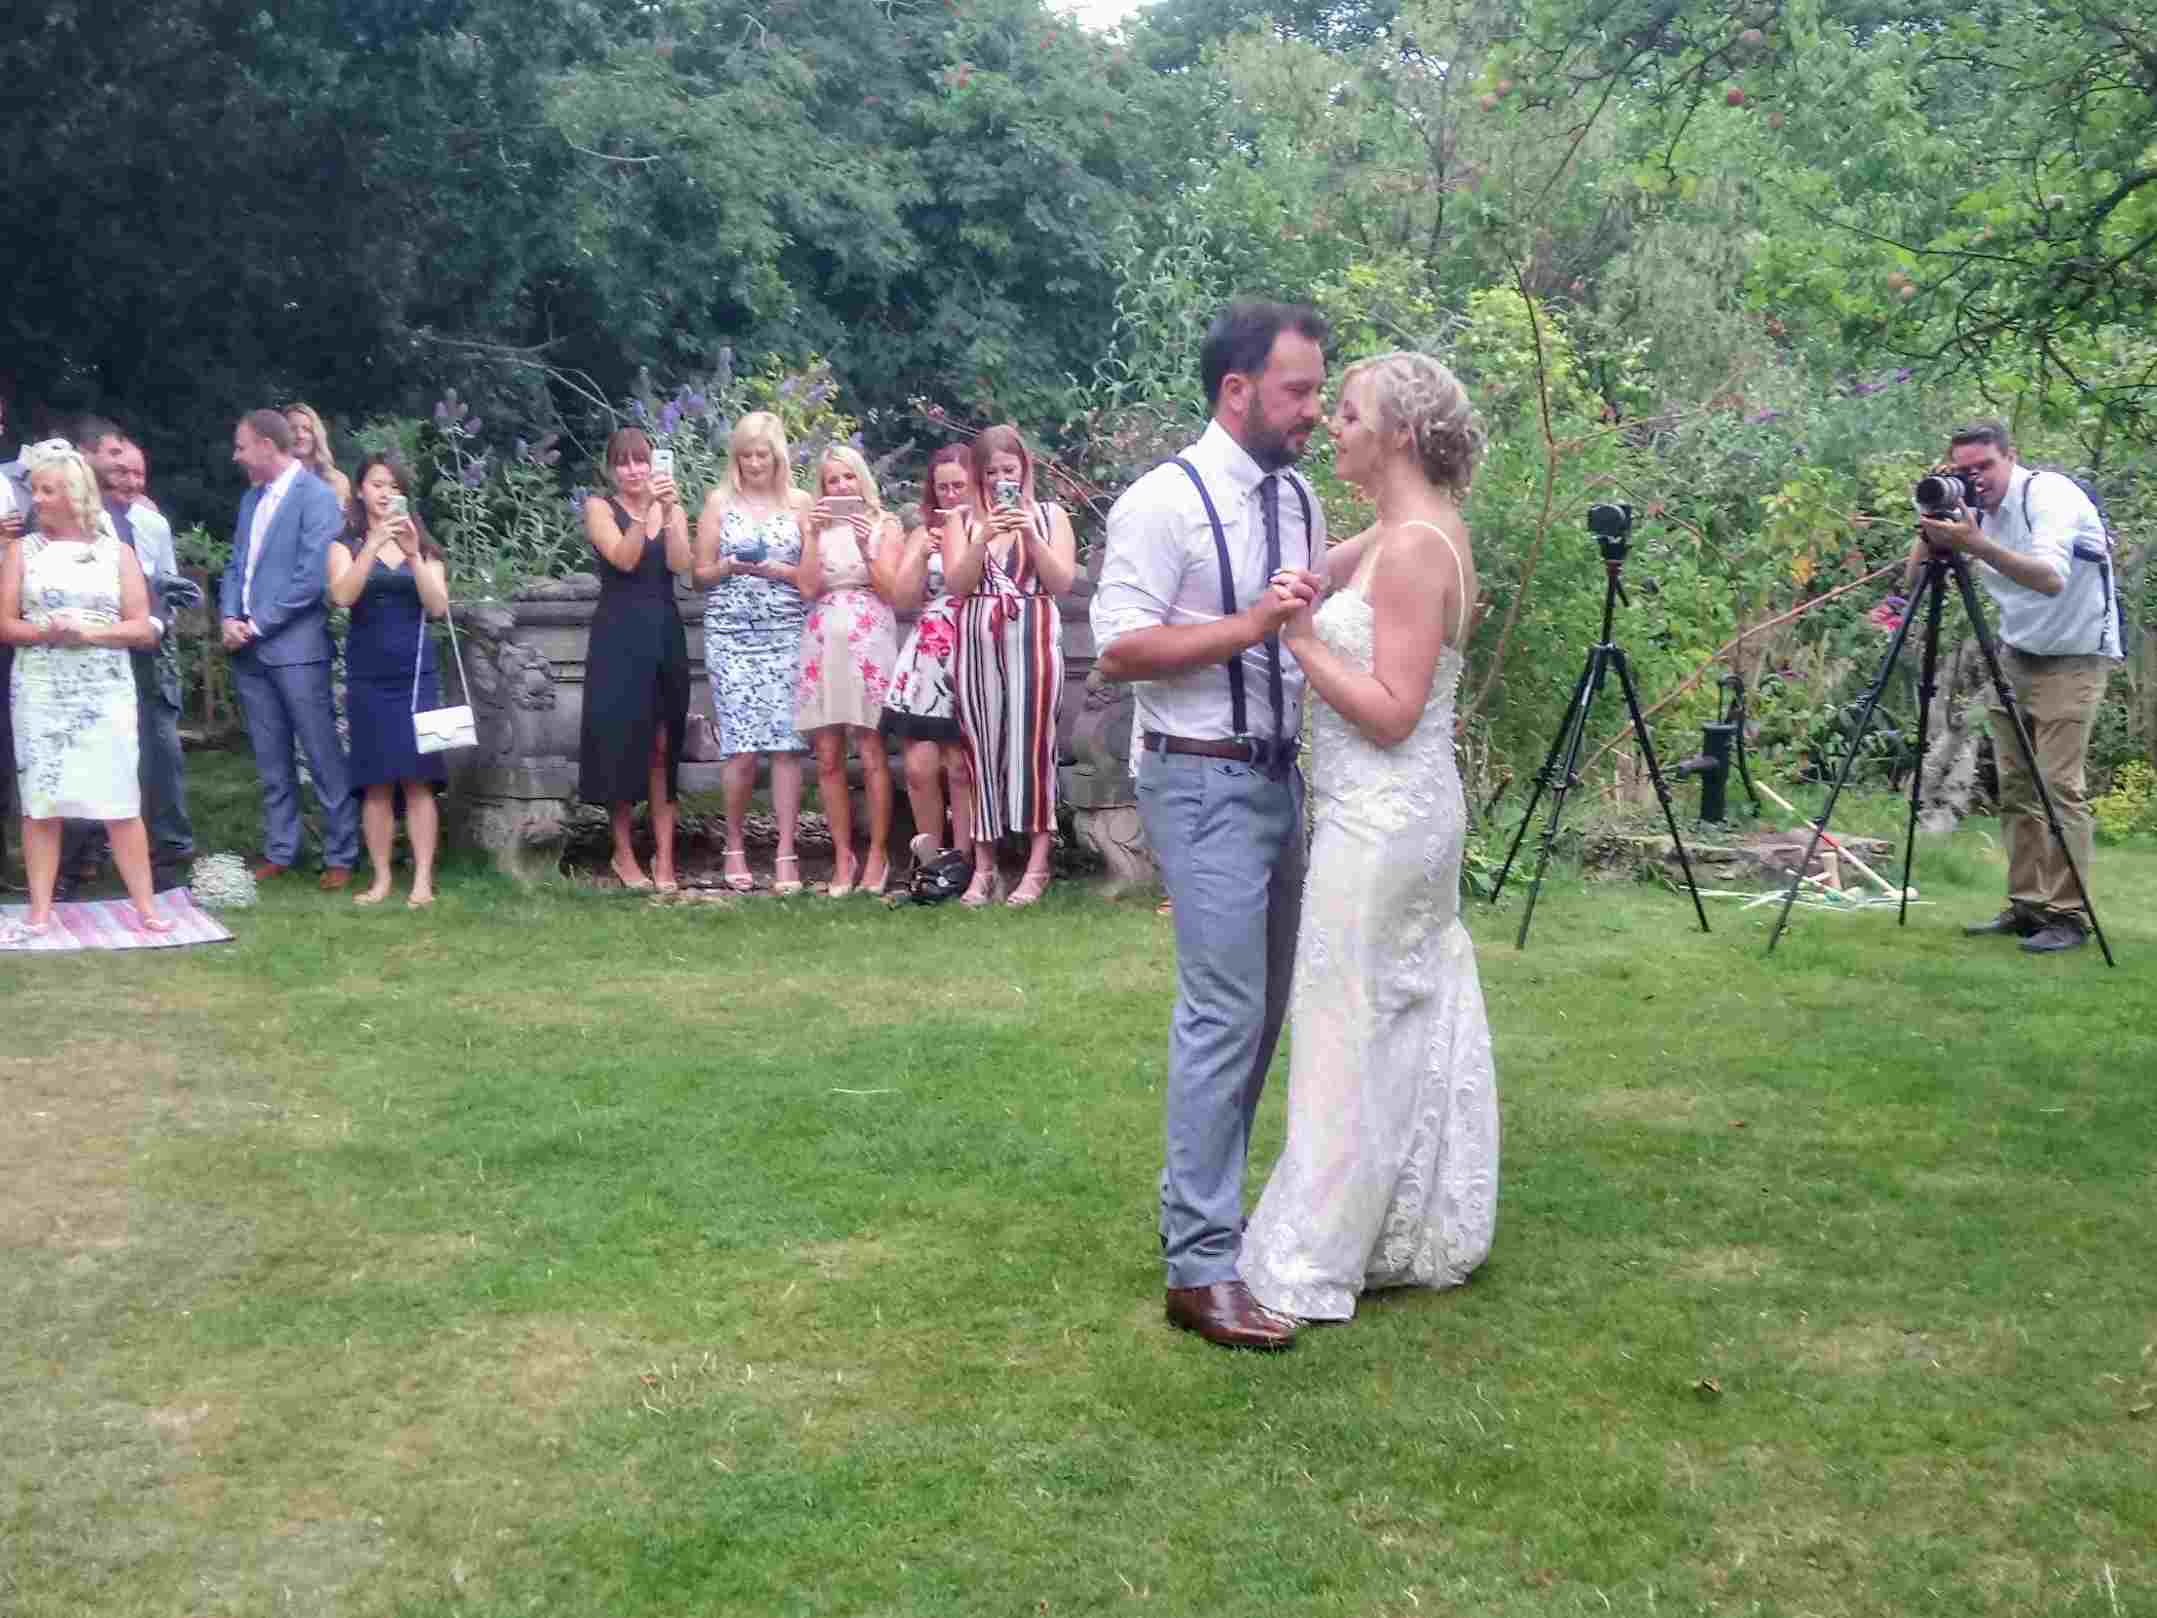 First Dance on the lawn of Crook Hall & Gardens